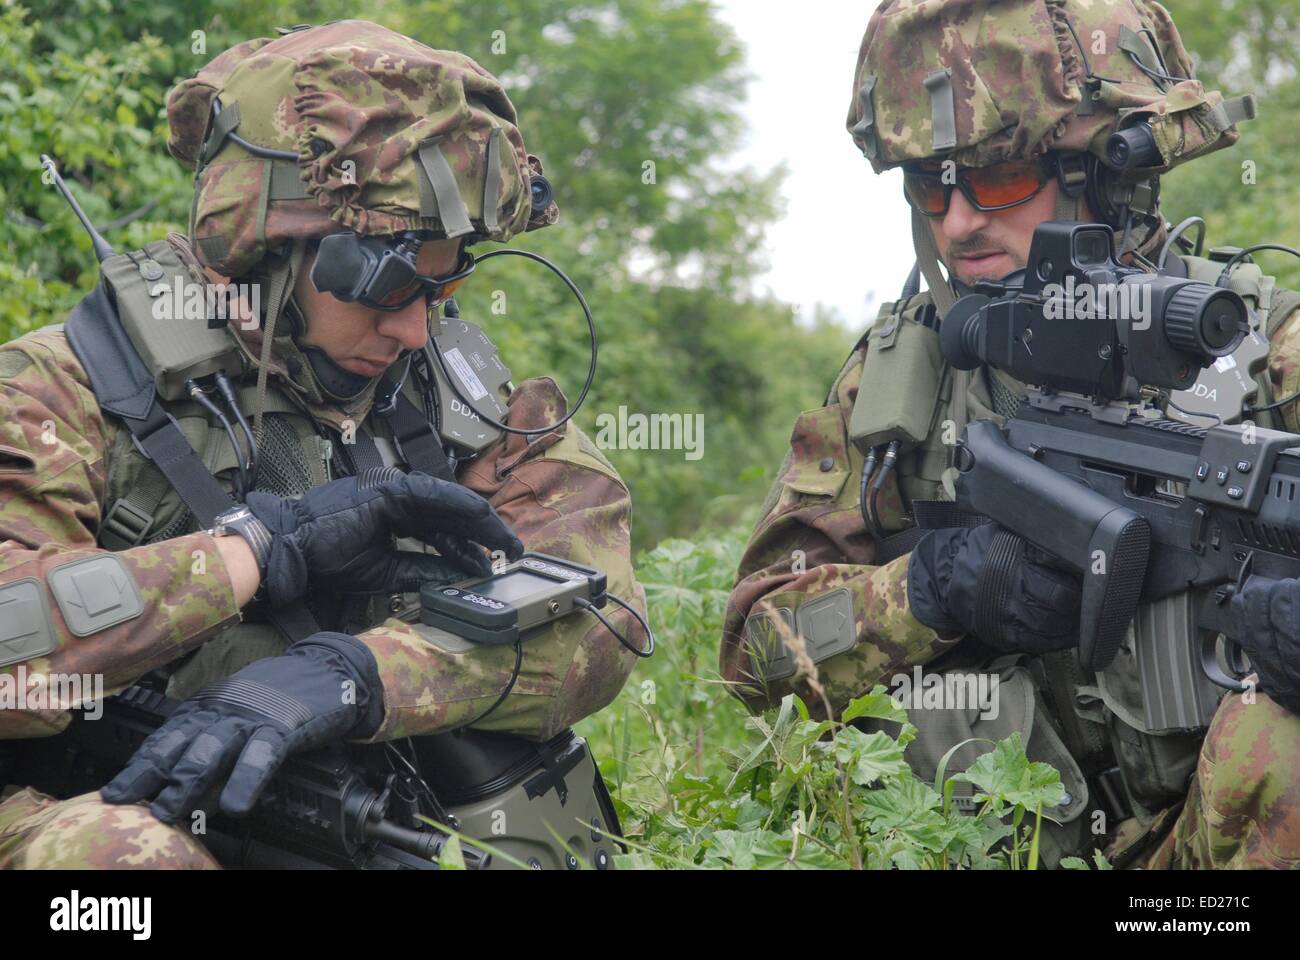 Ialian Army, the future soldier with new technological equipment Stock Photo